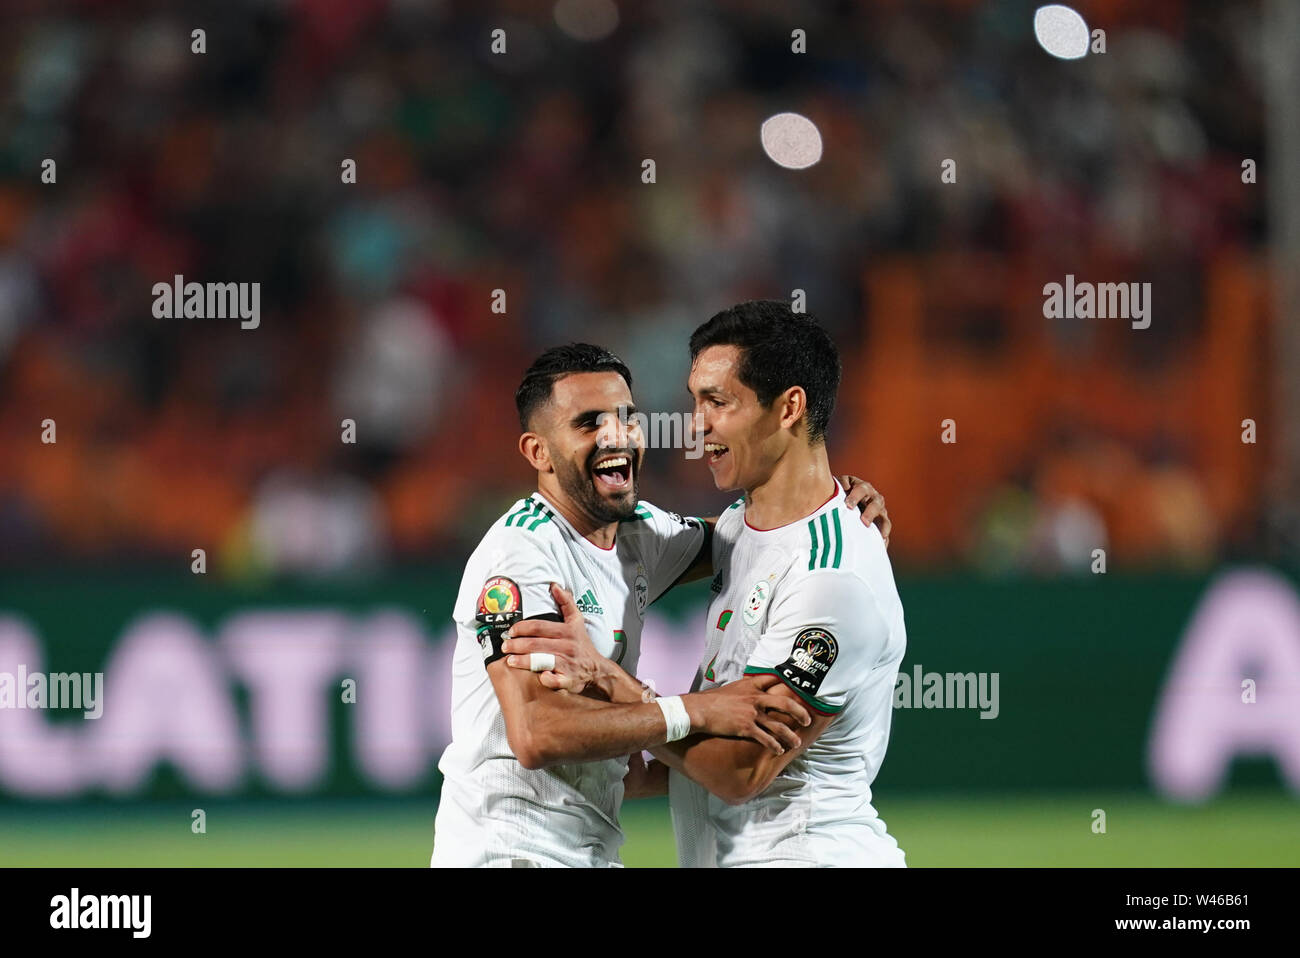 Cairo, Algeria, Egypt. 19th July, 2019. FRANCE OUT July 19, 2019: Riyad Karim Mahrez of Algeria and Aissa Mandi of Algeria celebrating winning after the Final of 2019 African Cup of Nations match between Algeria and Senegal at the Cairo International Stadium in Cairo, Egypt. Ulrik Pedersen/CSM/Alamy Live News Stock Photo